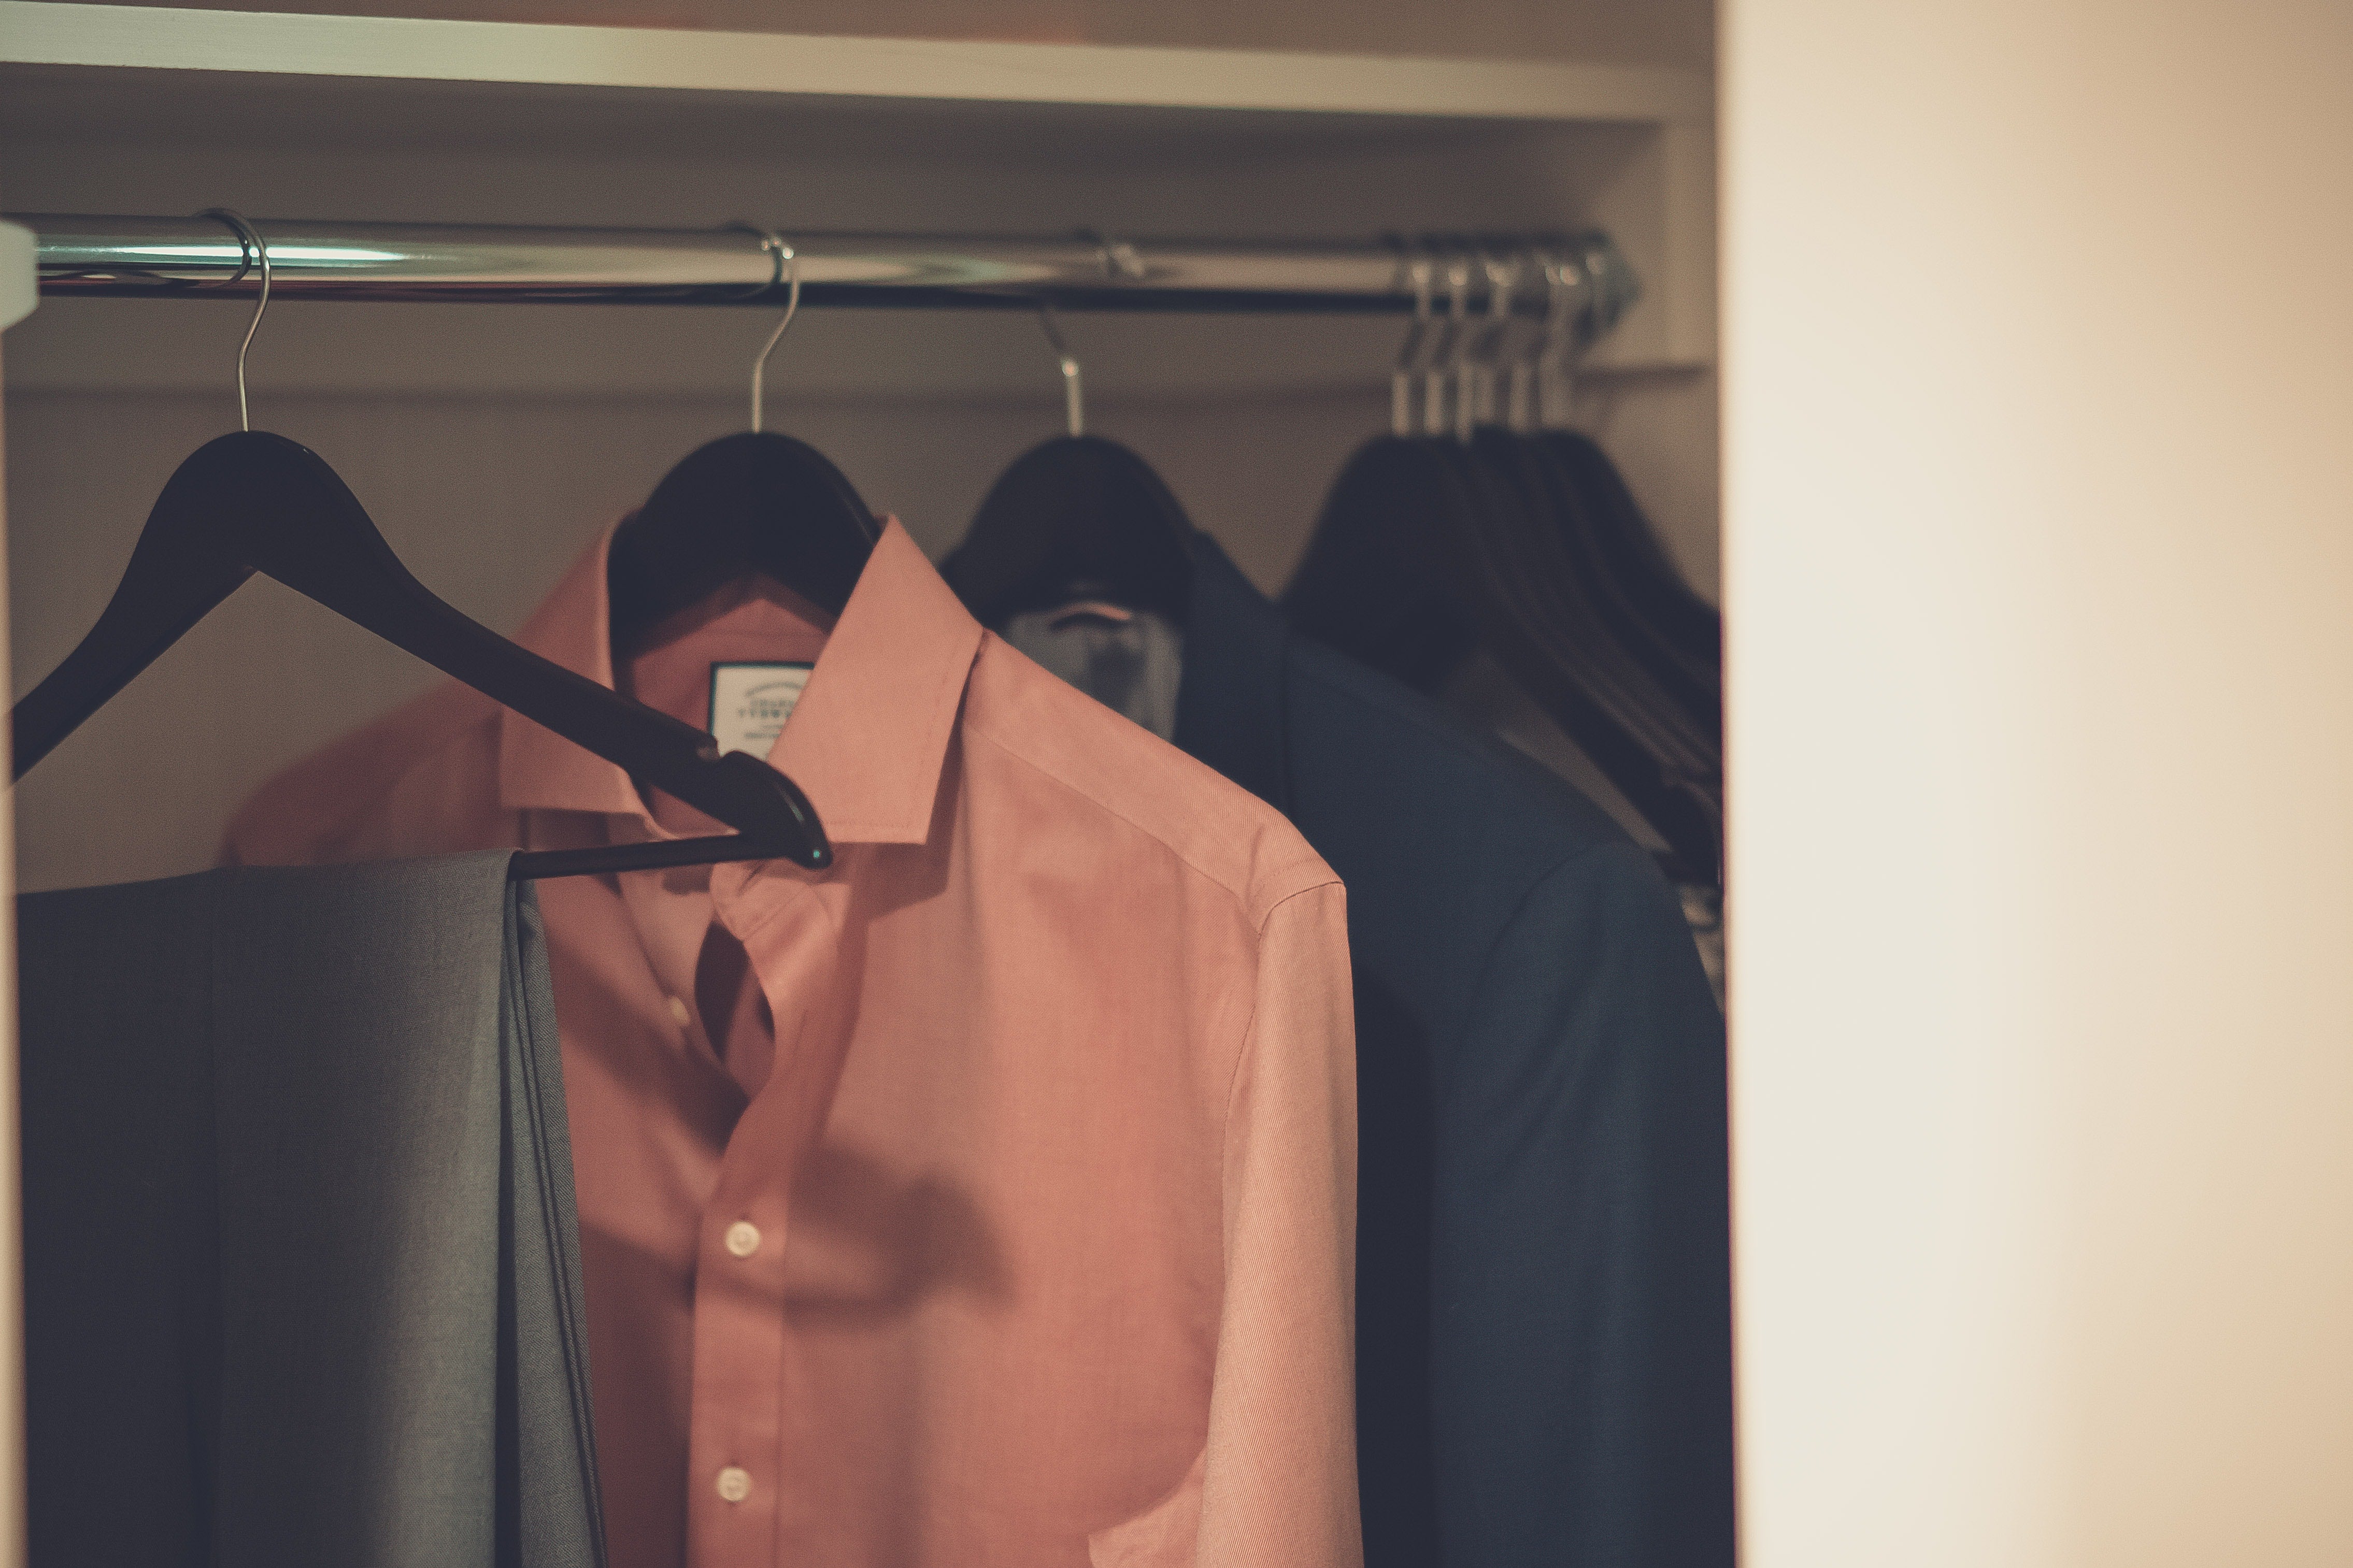 Stylish, gray men’s trousers and two shirts hung on black wooden hangers.